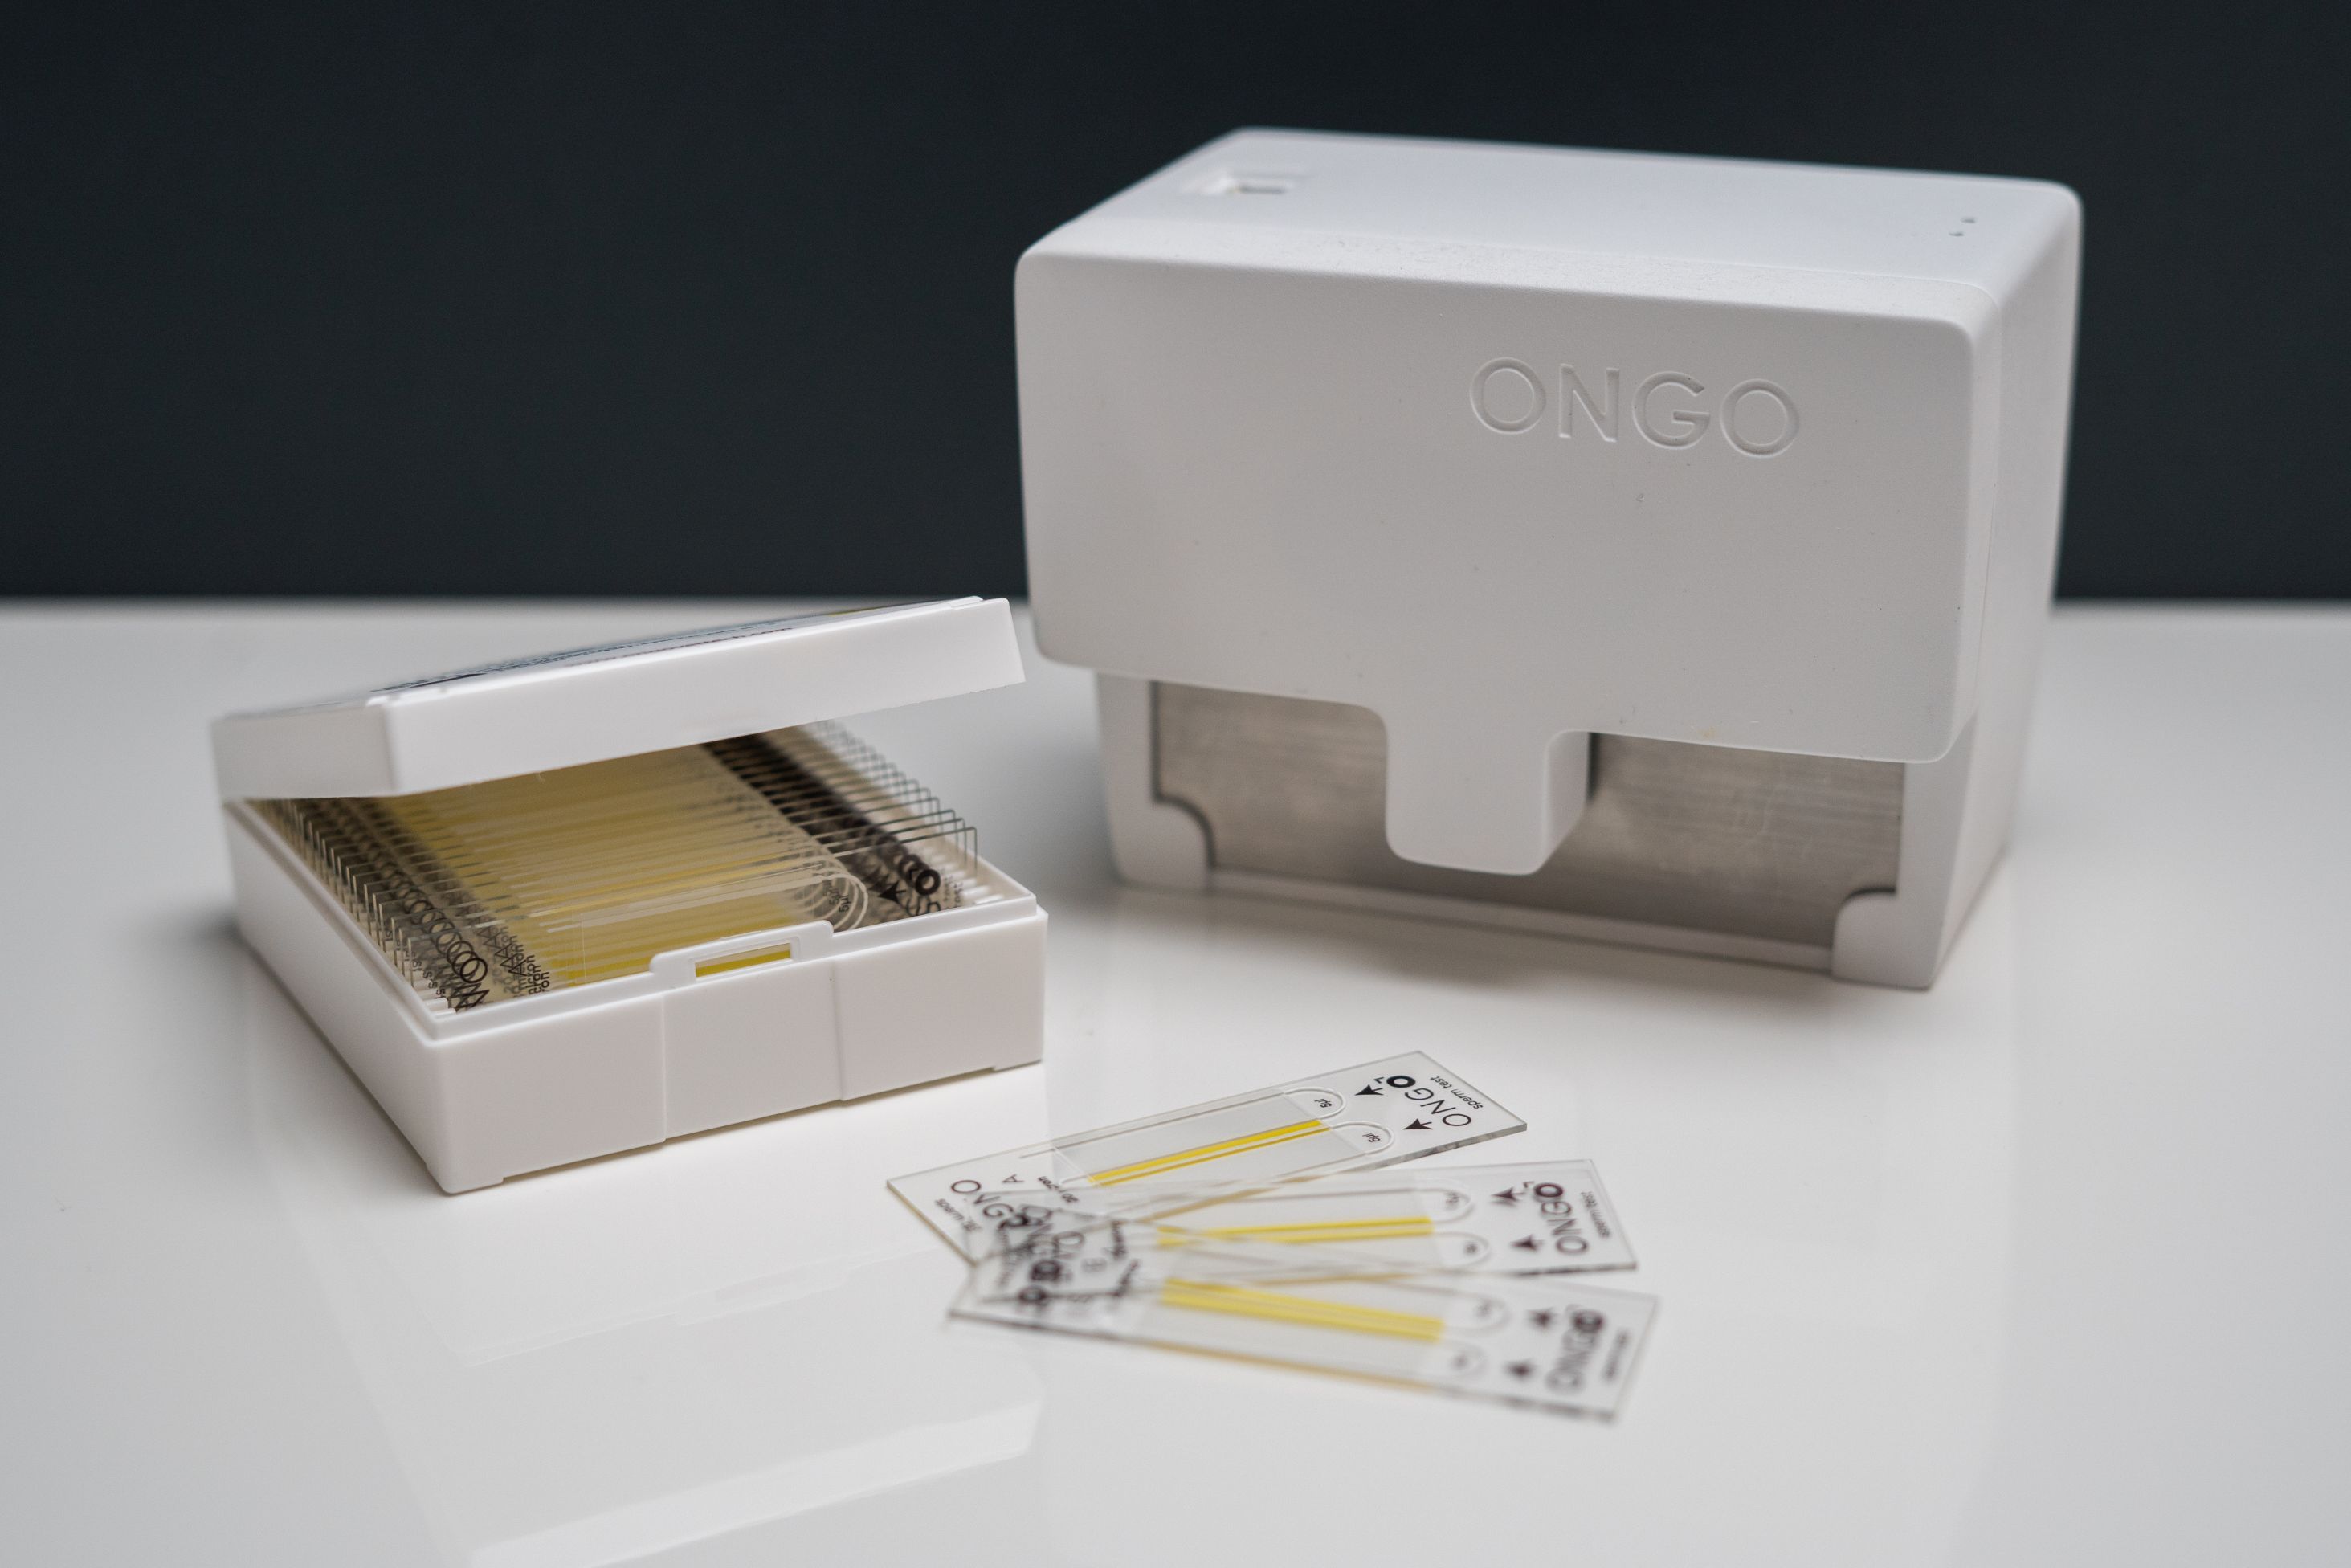 ONGO VISION - Portable sperm analysing unit with ONGO Slides from www.ongovettech.com